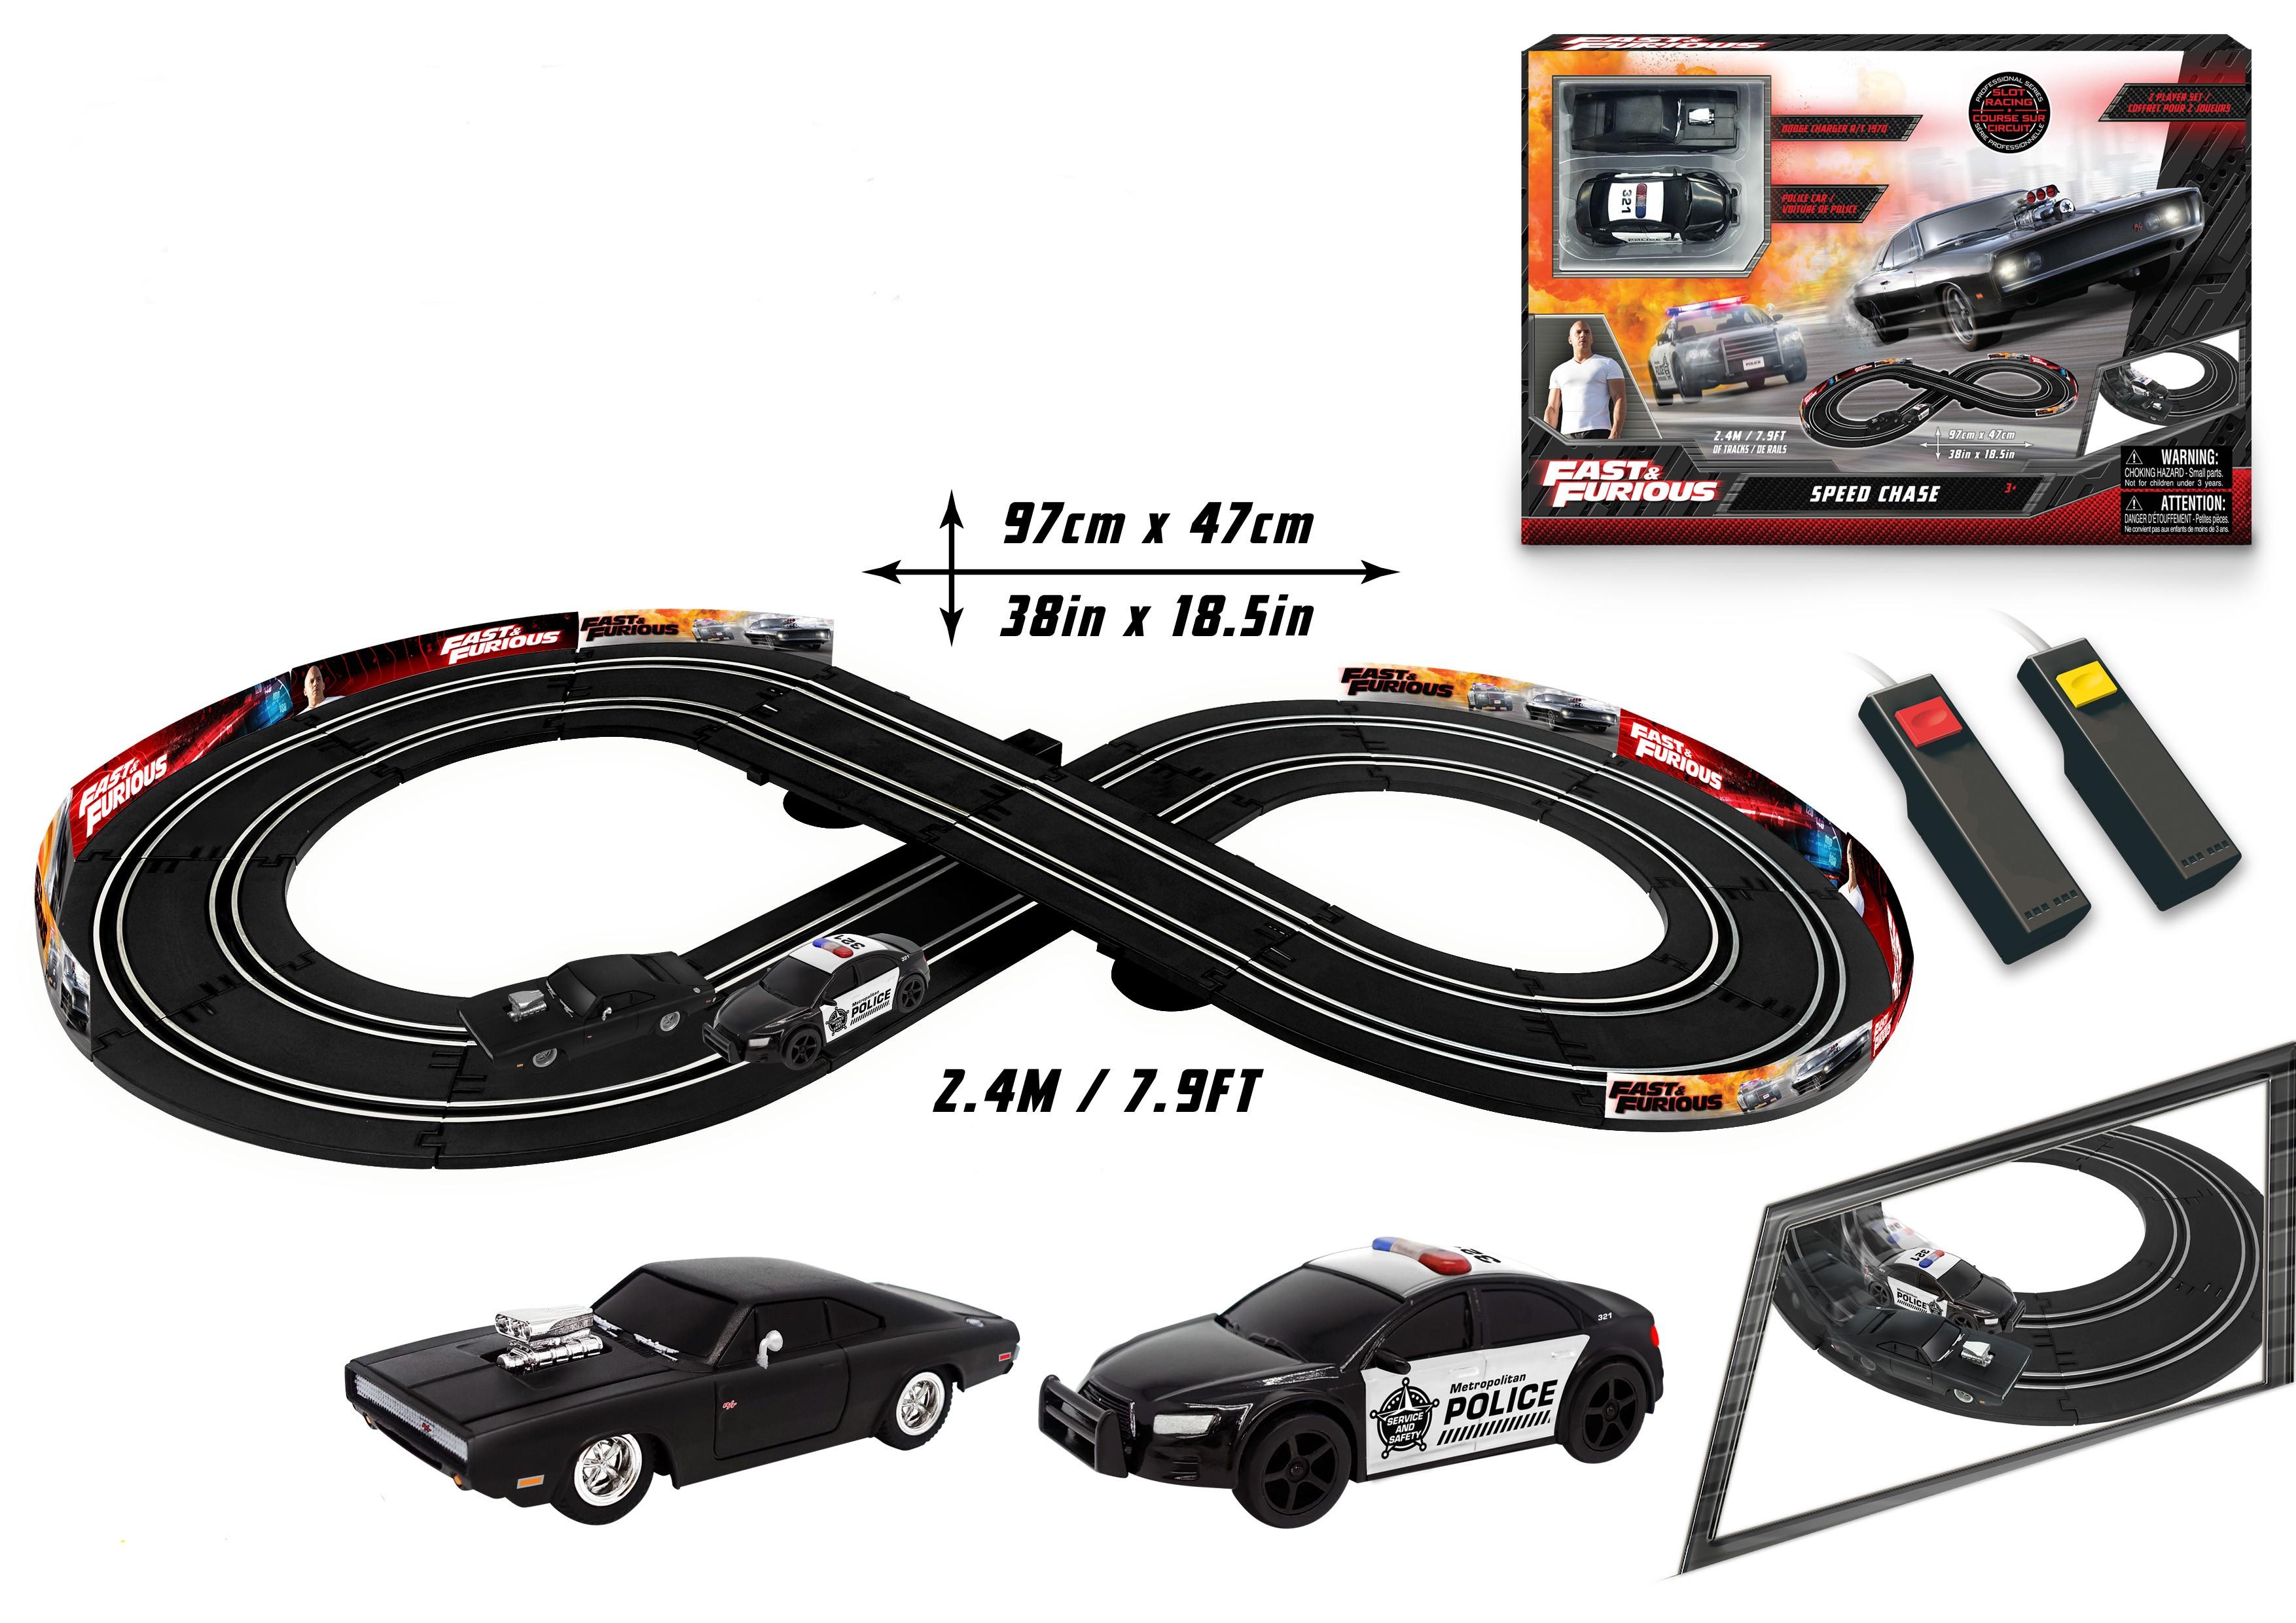 Fast & Furious Speed Chase - Figure 8 Layout Design